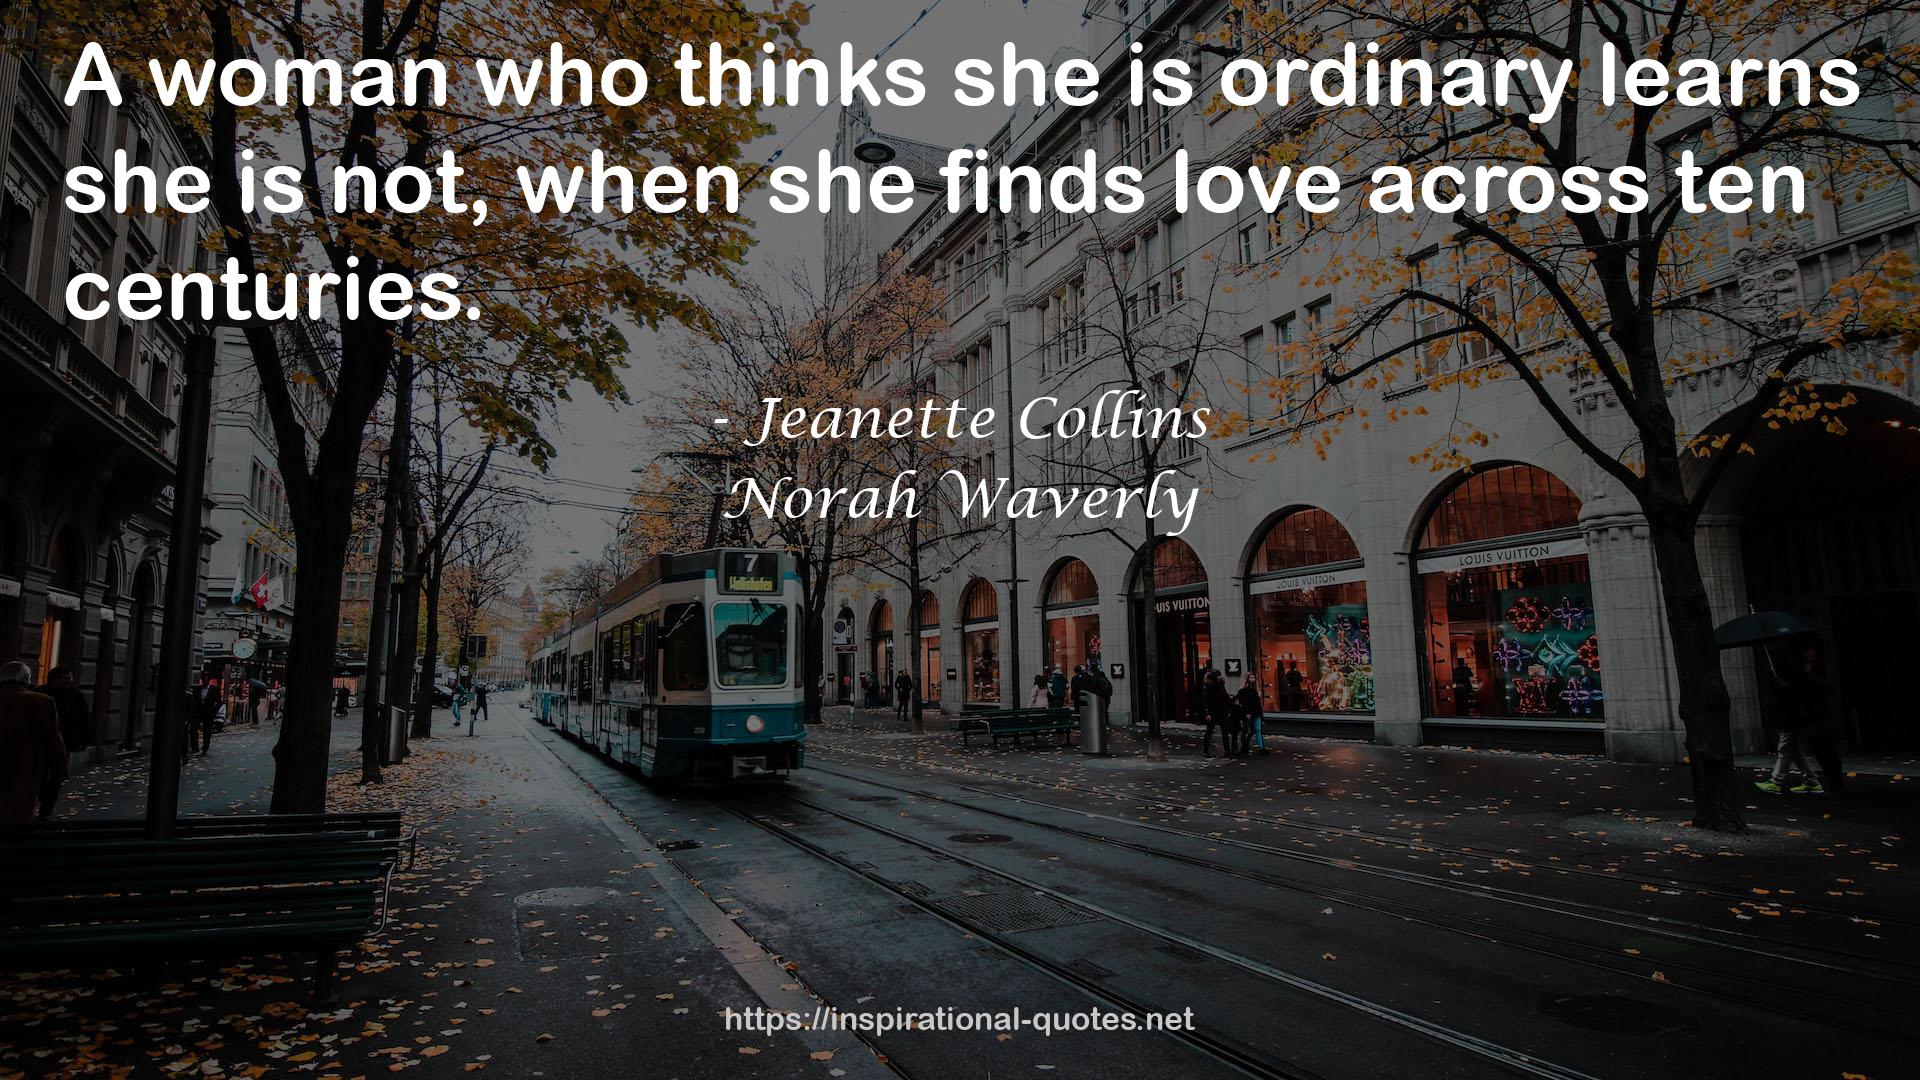 Jeanette Collins QUOTES